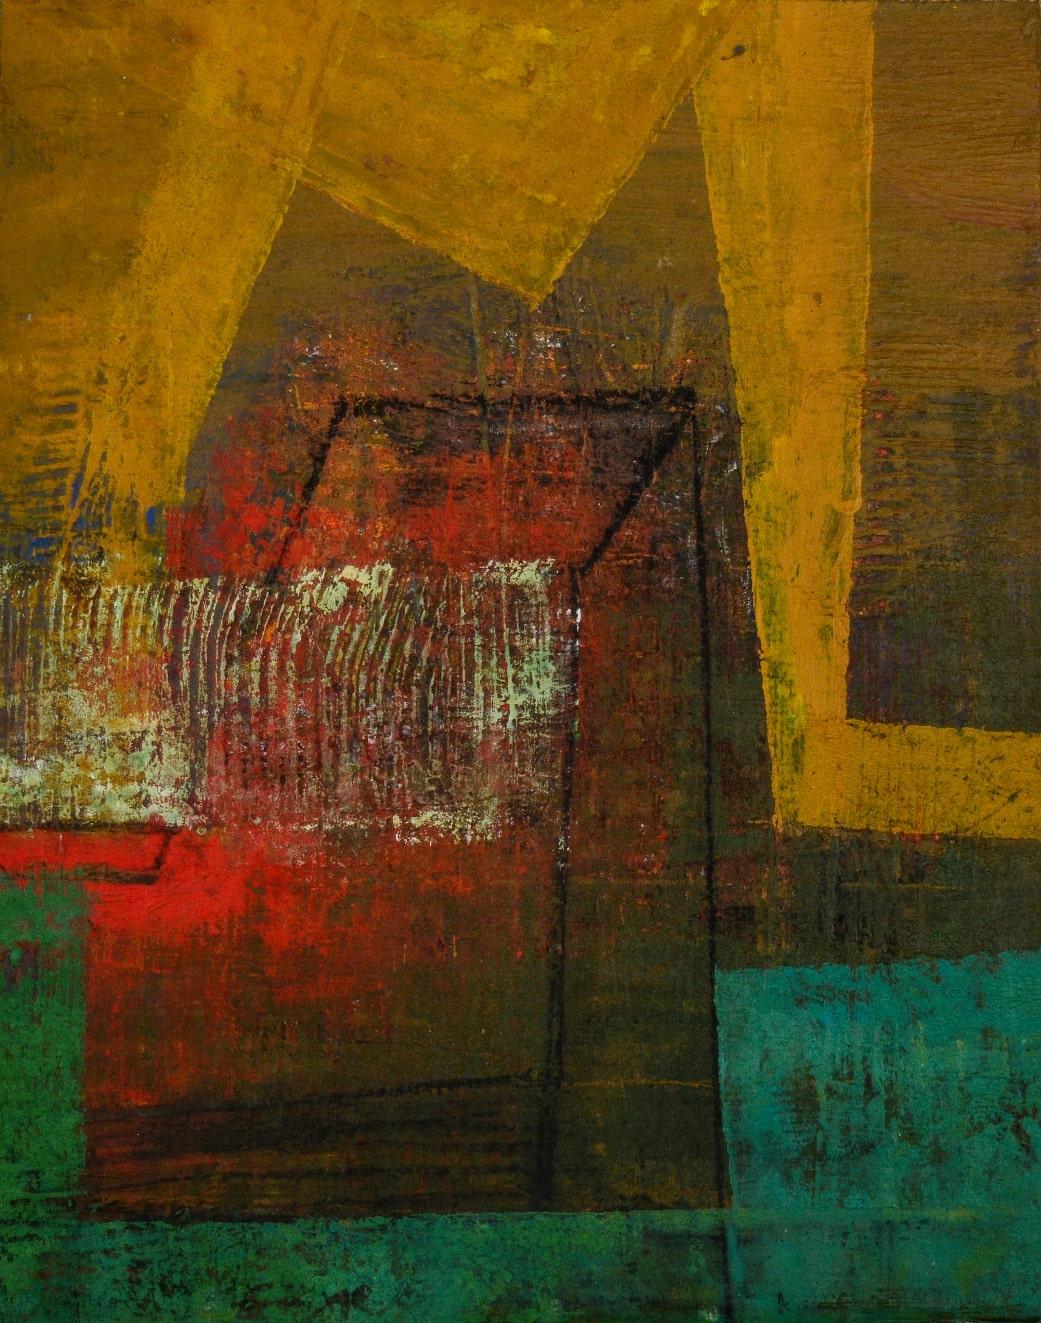 Rajib Bhattacharjee Abstract Painting - Melody of Spaces, Acrylic & Charcoal on Archival Paper by Contemporary-In Stock